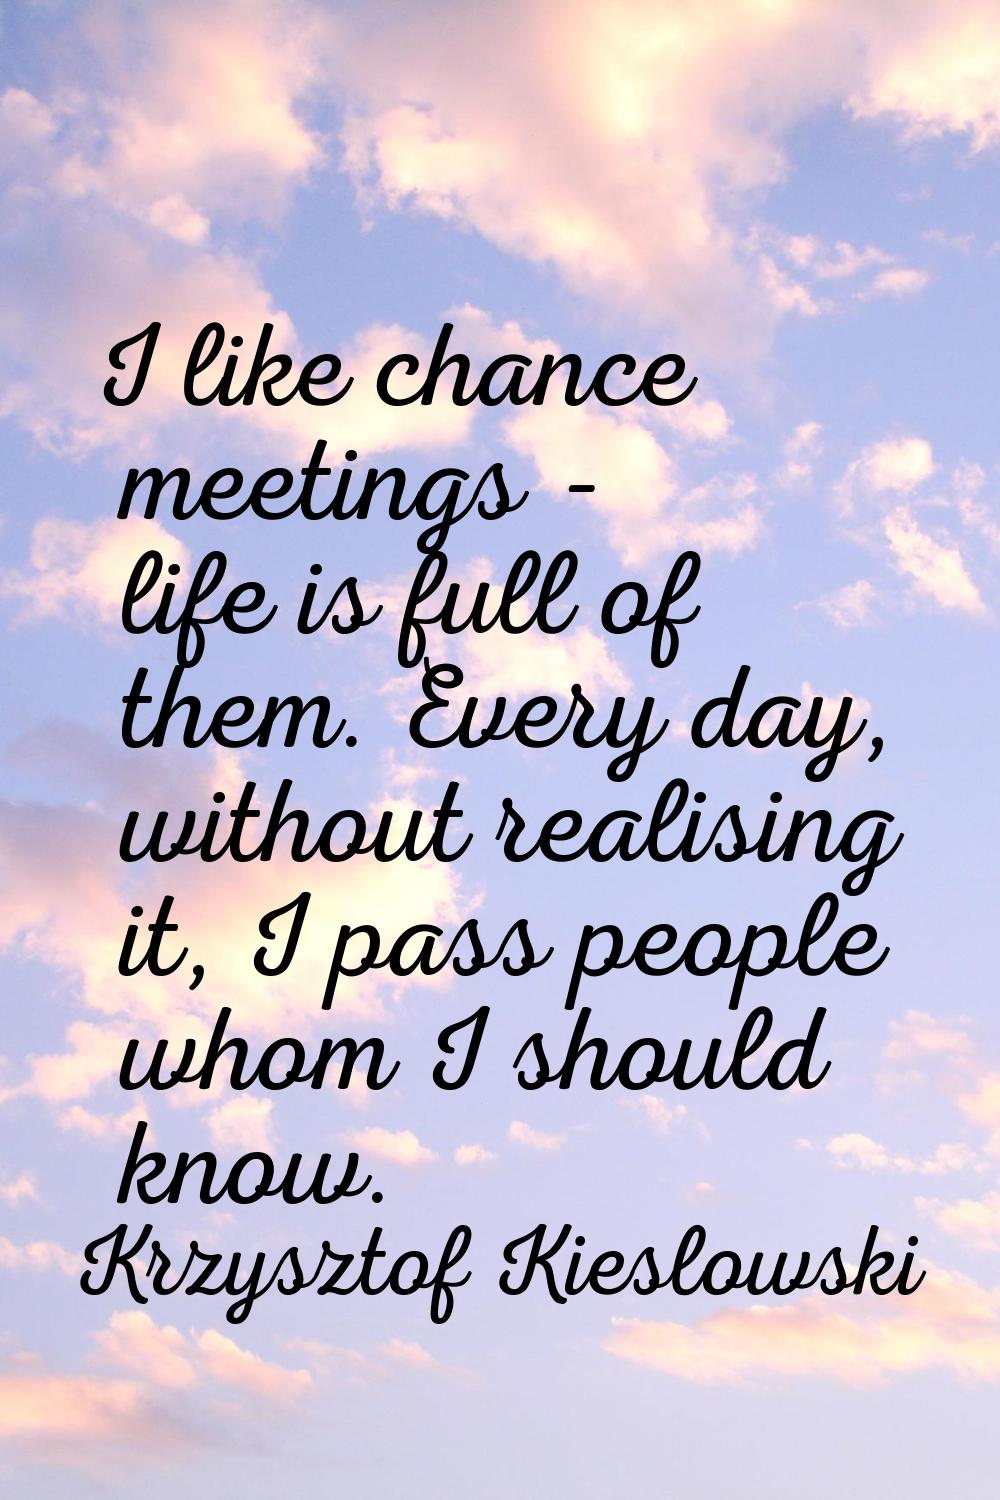 I like chance meetings - life is full of them. Every day, without realising it, I pass people whom 